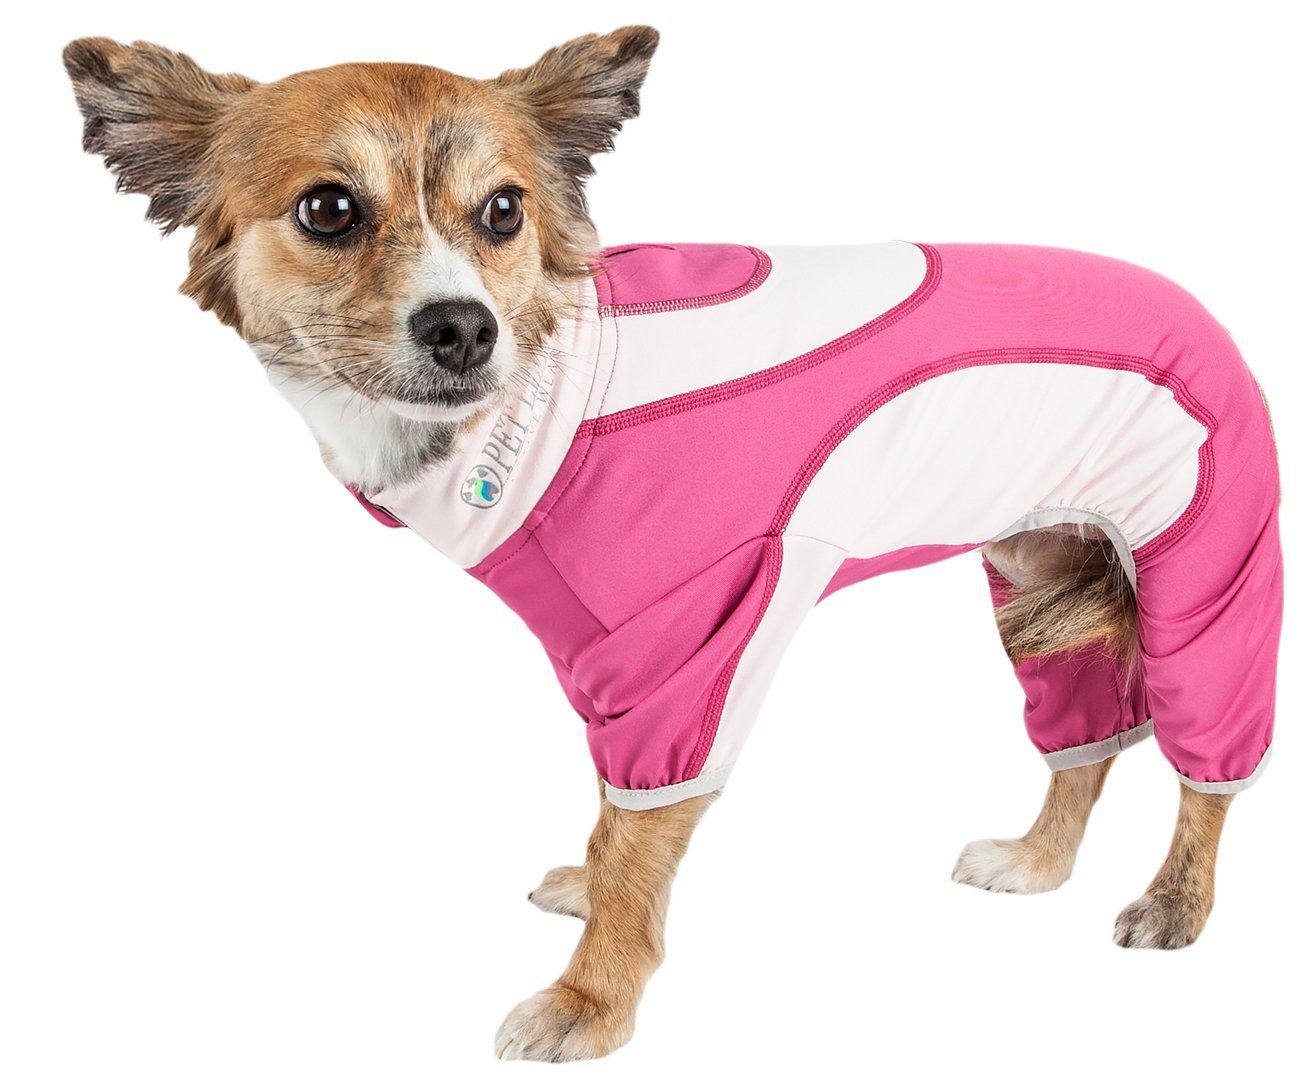 Pet Life ® Active 'Warm-Pup' Stretchy and Quick-Drying Fitness Dog Yoga Warm-Up Tracksuit X-Small Hot Pink / Light Pink